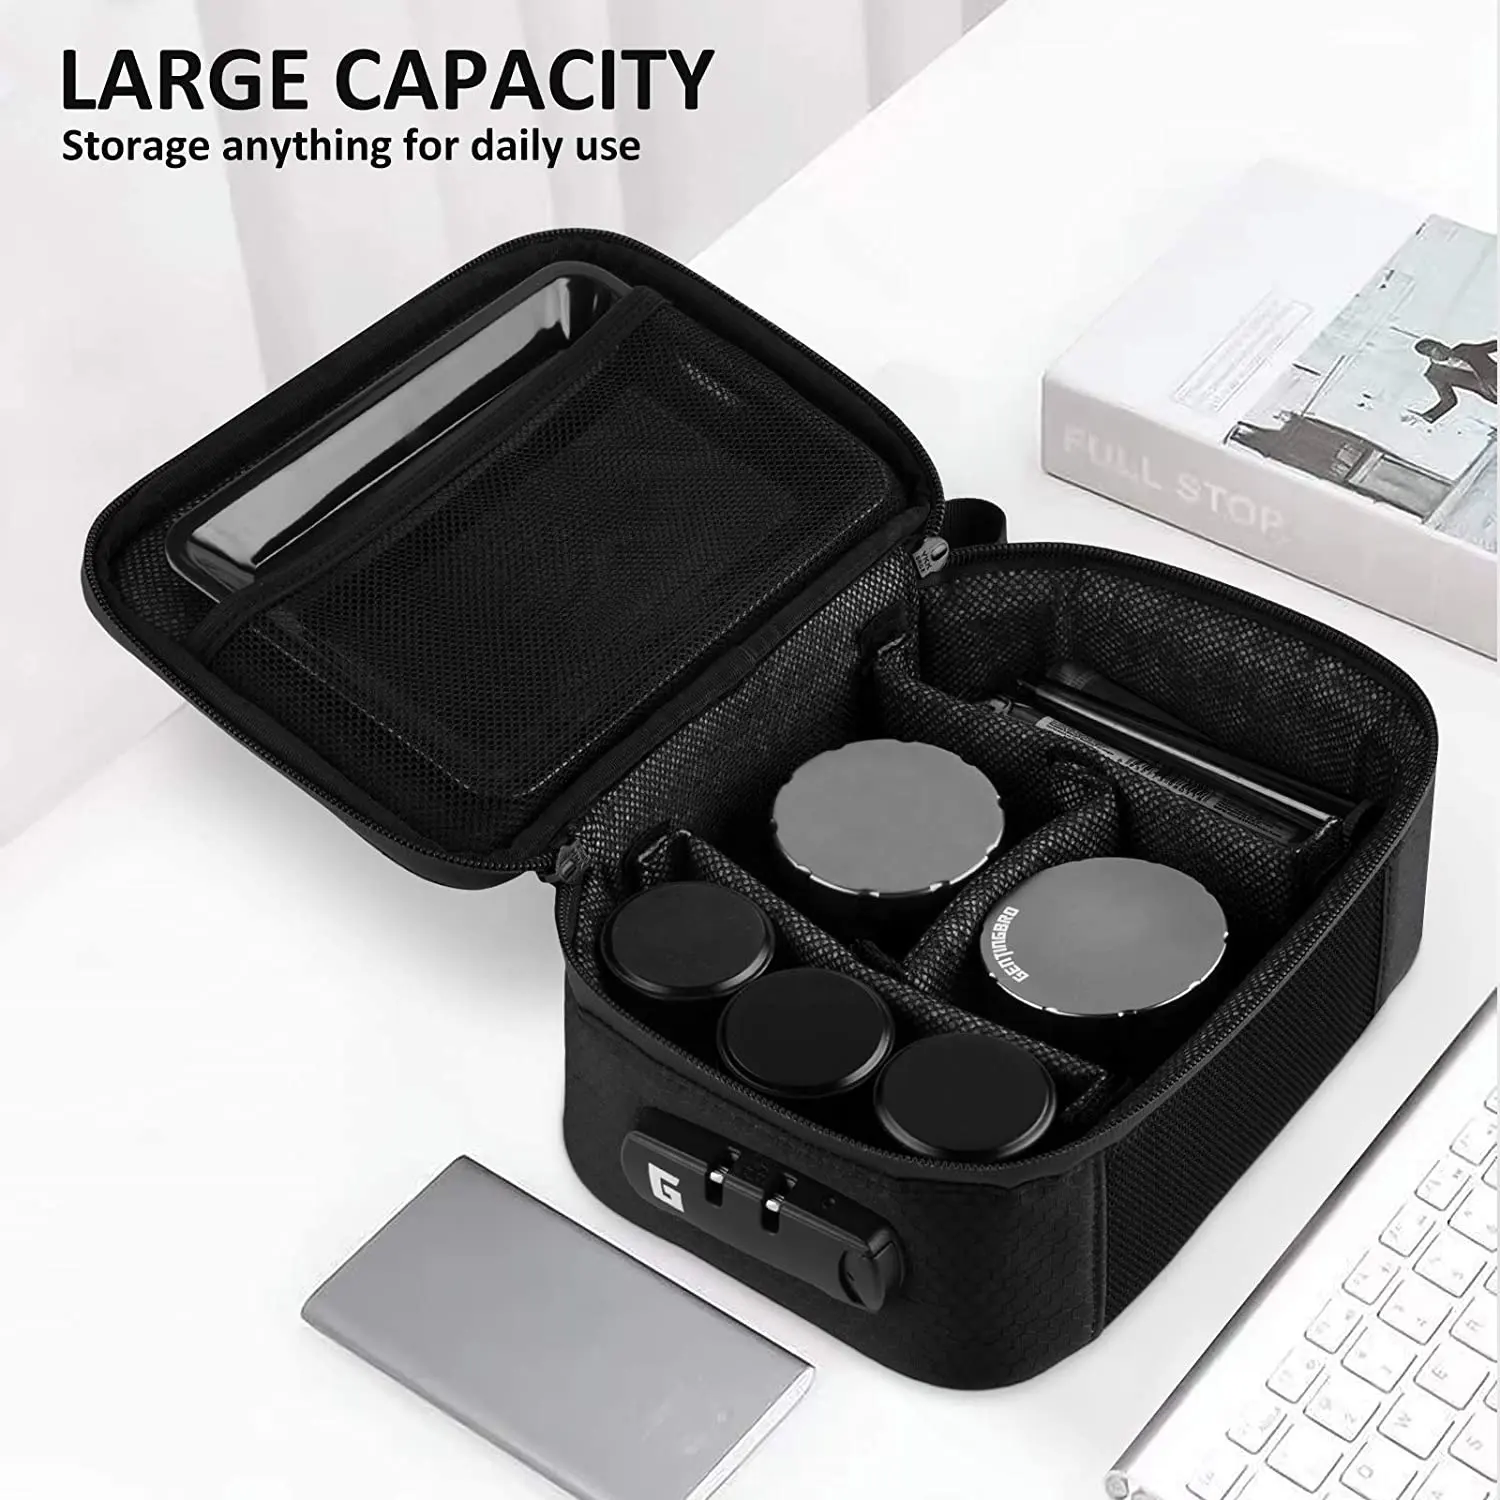 Smell Proof Carbon Bag Carbon Lined Custom Stash Glass Odor Smellproof Smoke Pipe Case Box Bags Smell Proof Bag For Smoking Weed Accessories